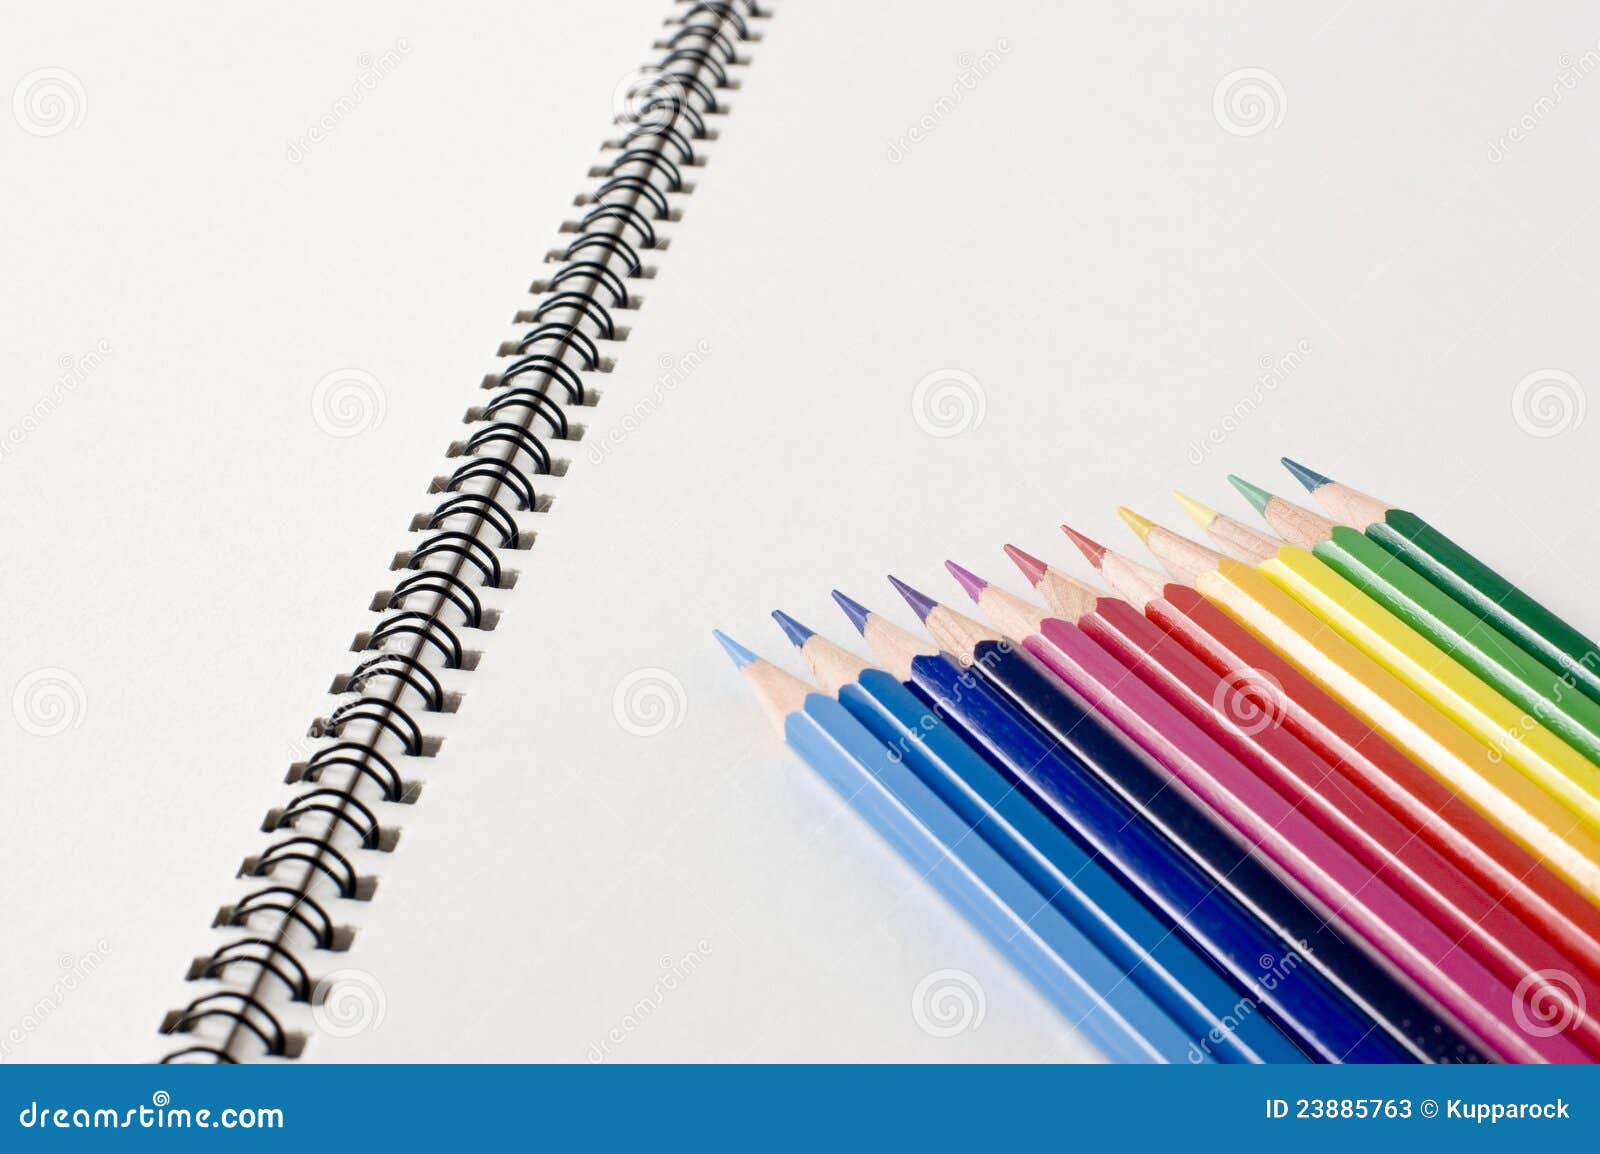 Sketchbook And Colored Pencils. Stock Photos Image 23885763